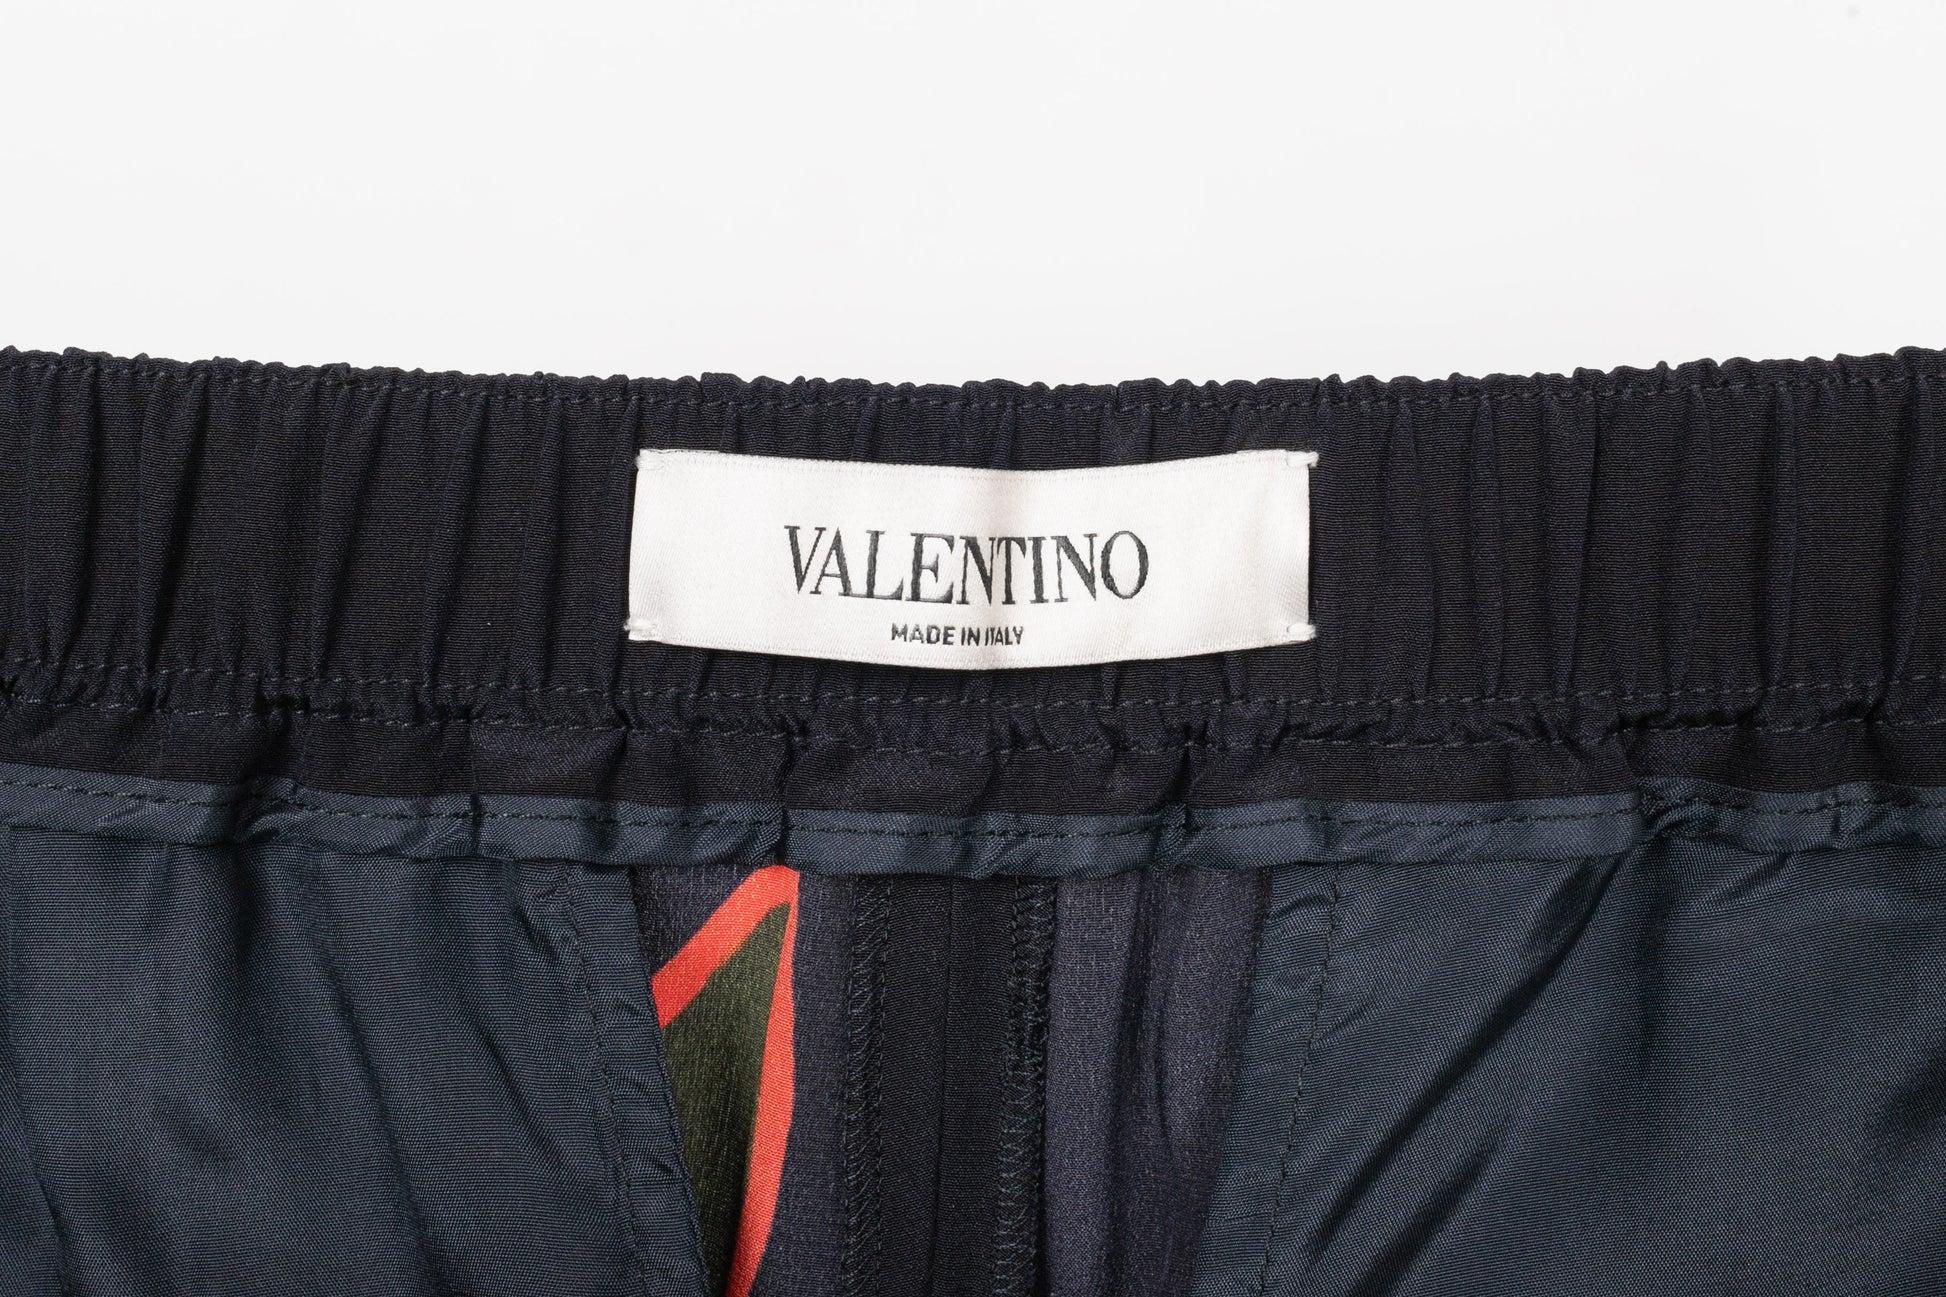 Valentino Silk Pants Printed with Flowers, 2020 For Sale 3